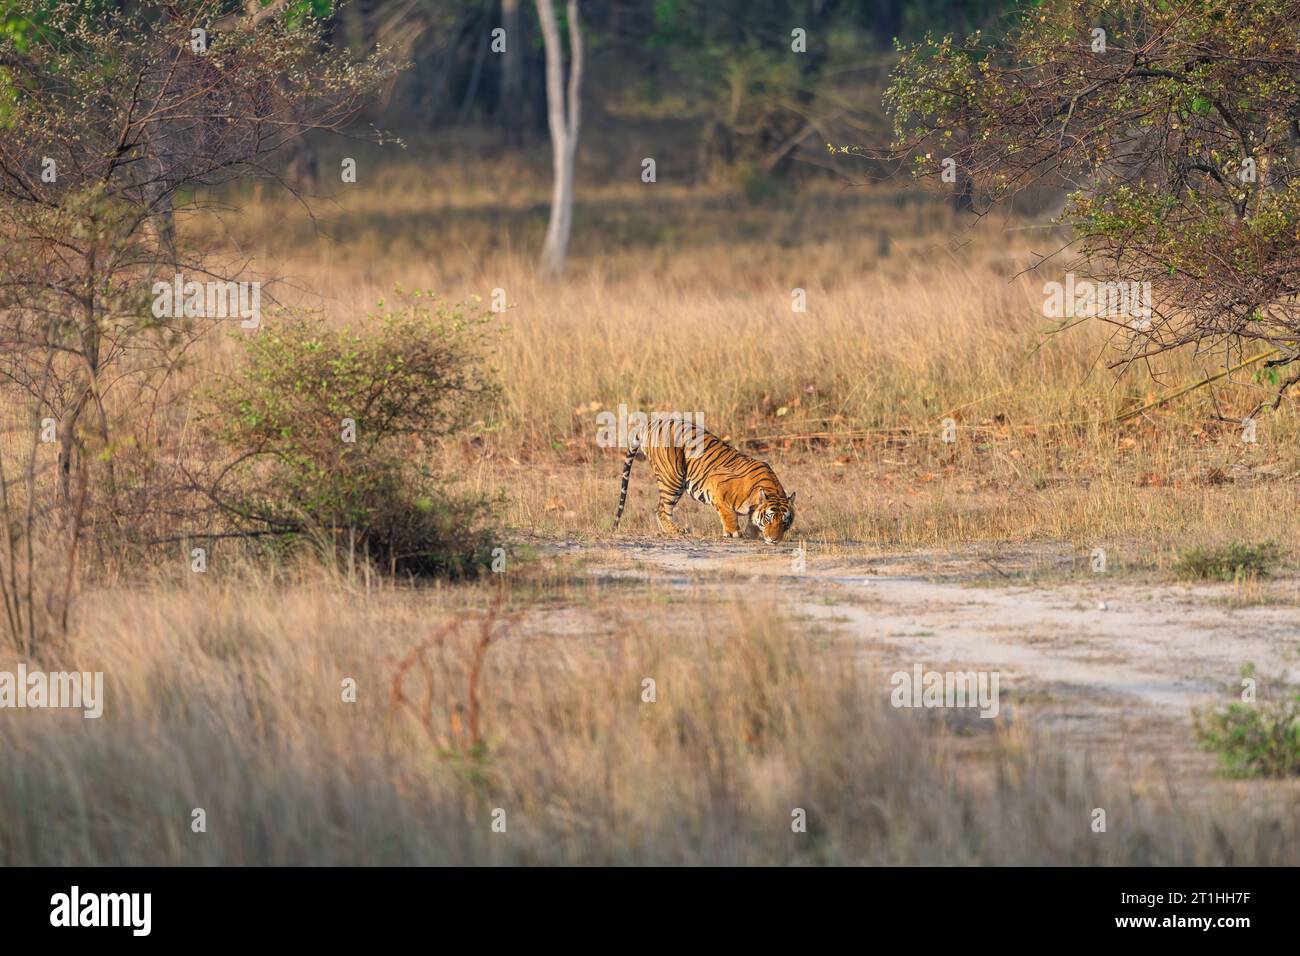 Habitat image of a male tiger sniffing the ground at Tala zone of Bandhavgarh tiger reserve Stock Photo